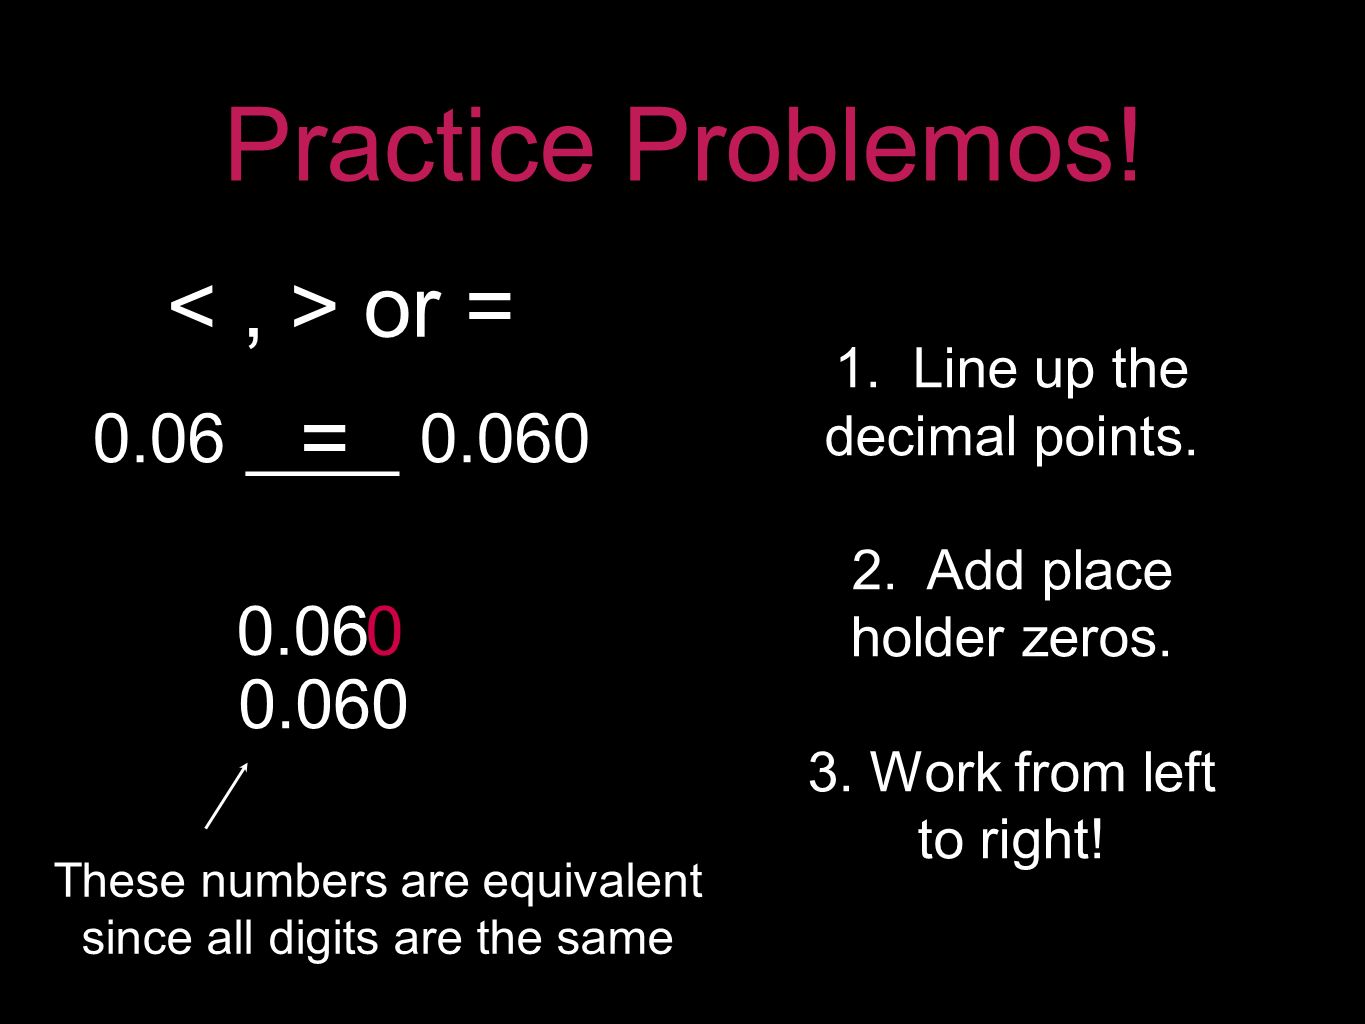 Practice Problemos ____ or = 1. Line up the decimal points.